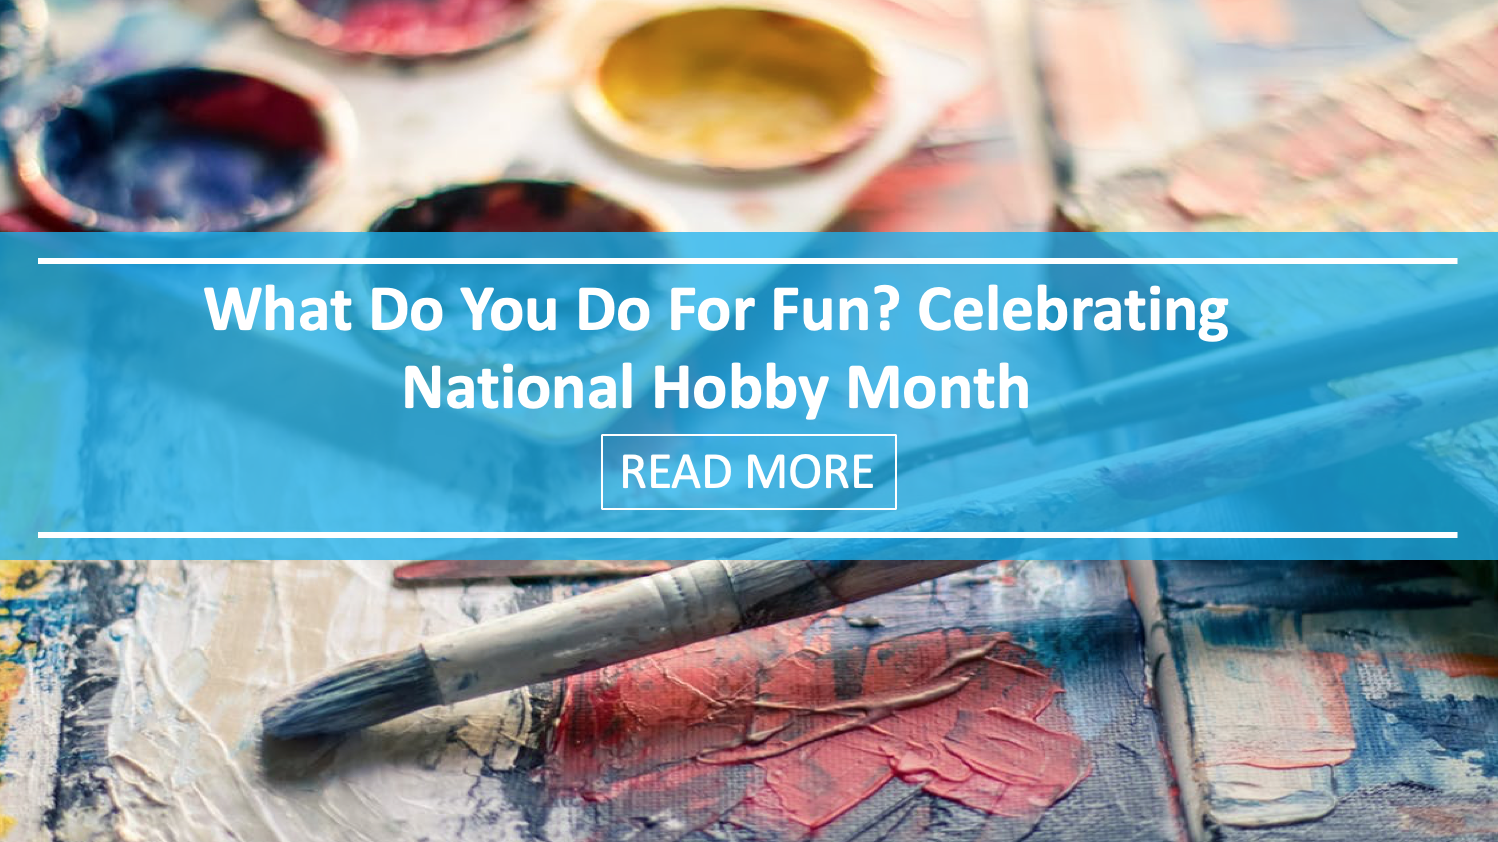 What do You do for Fun? Celebrating National Hobby Month (January) in Your ESL Classroom